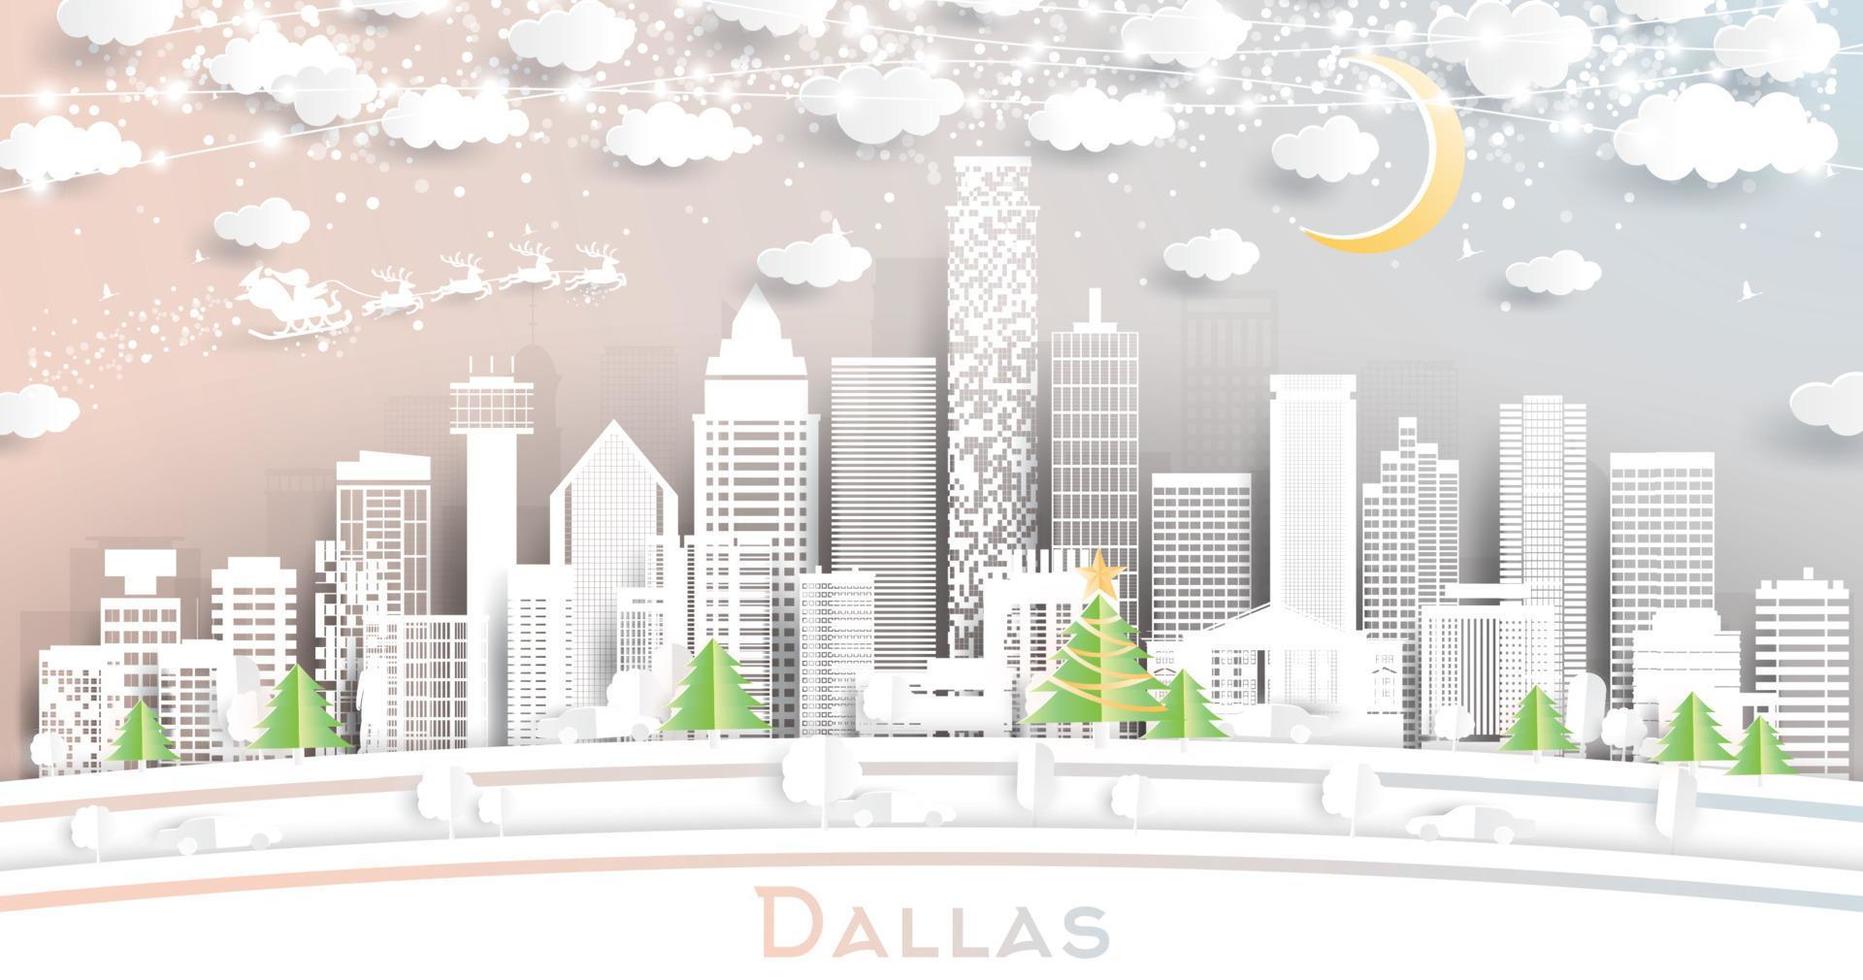 Dallas Texas City Skyline in Paper Cut Style with Snowflakes, Moon and Neon Garland. vector